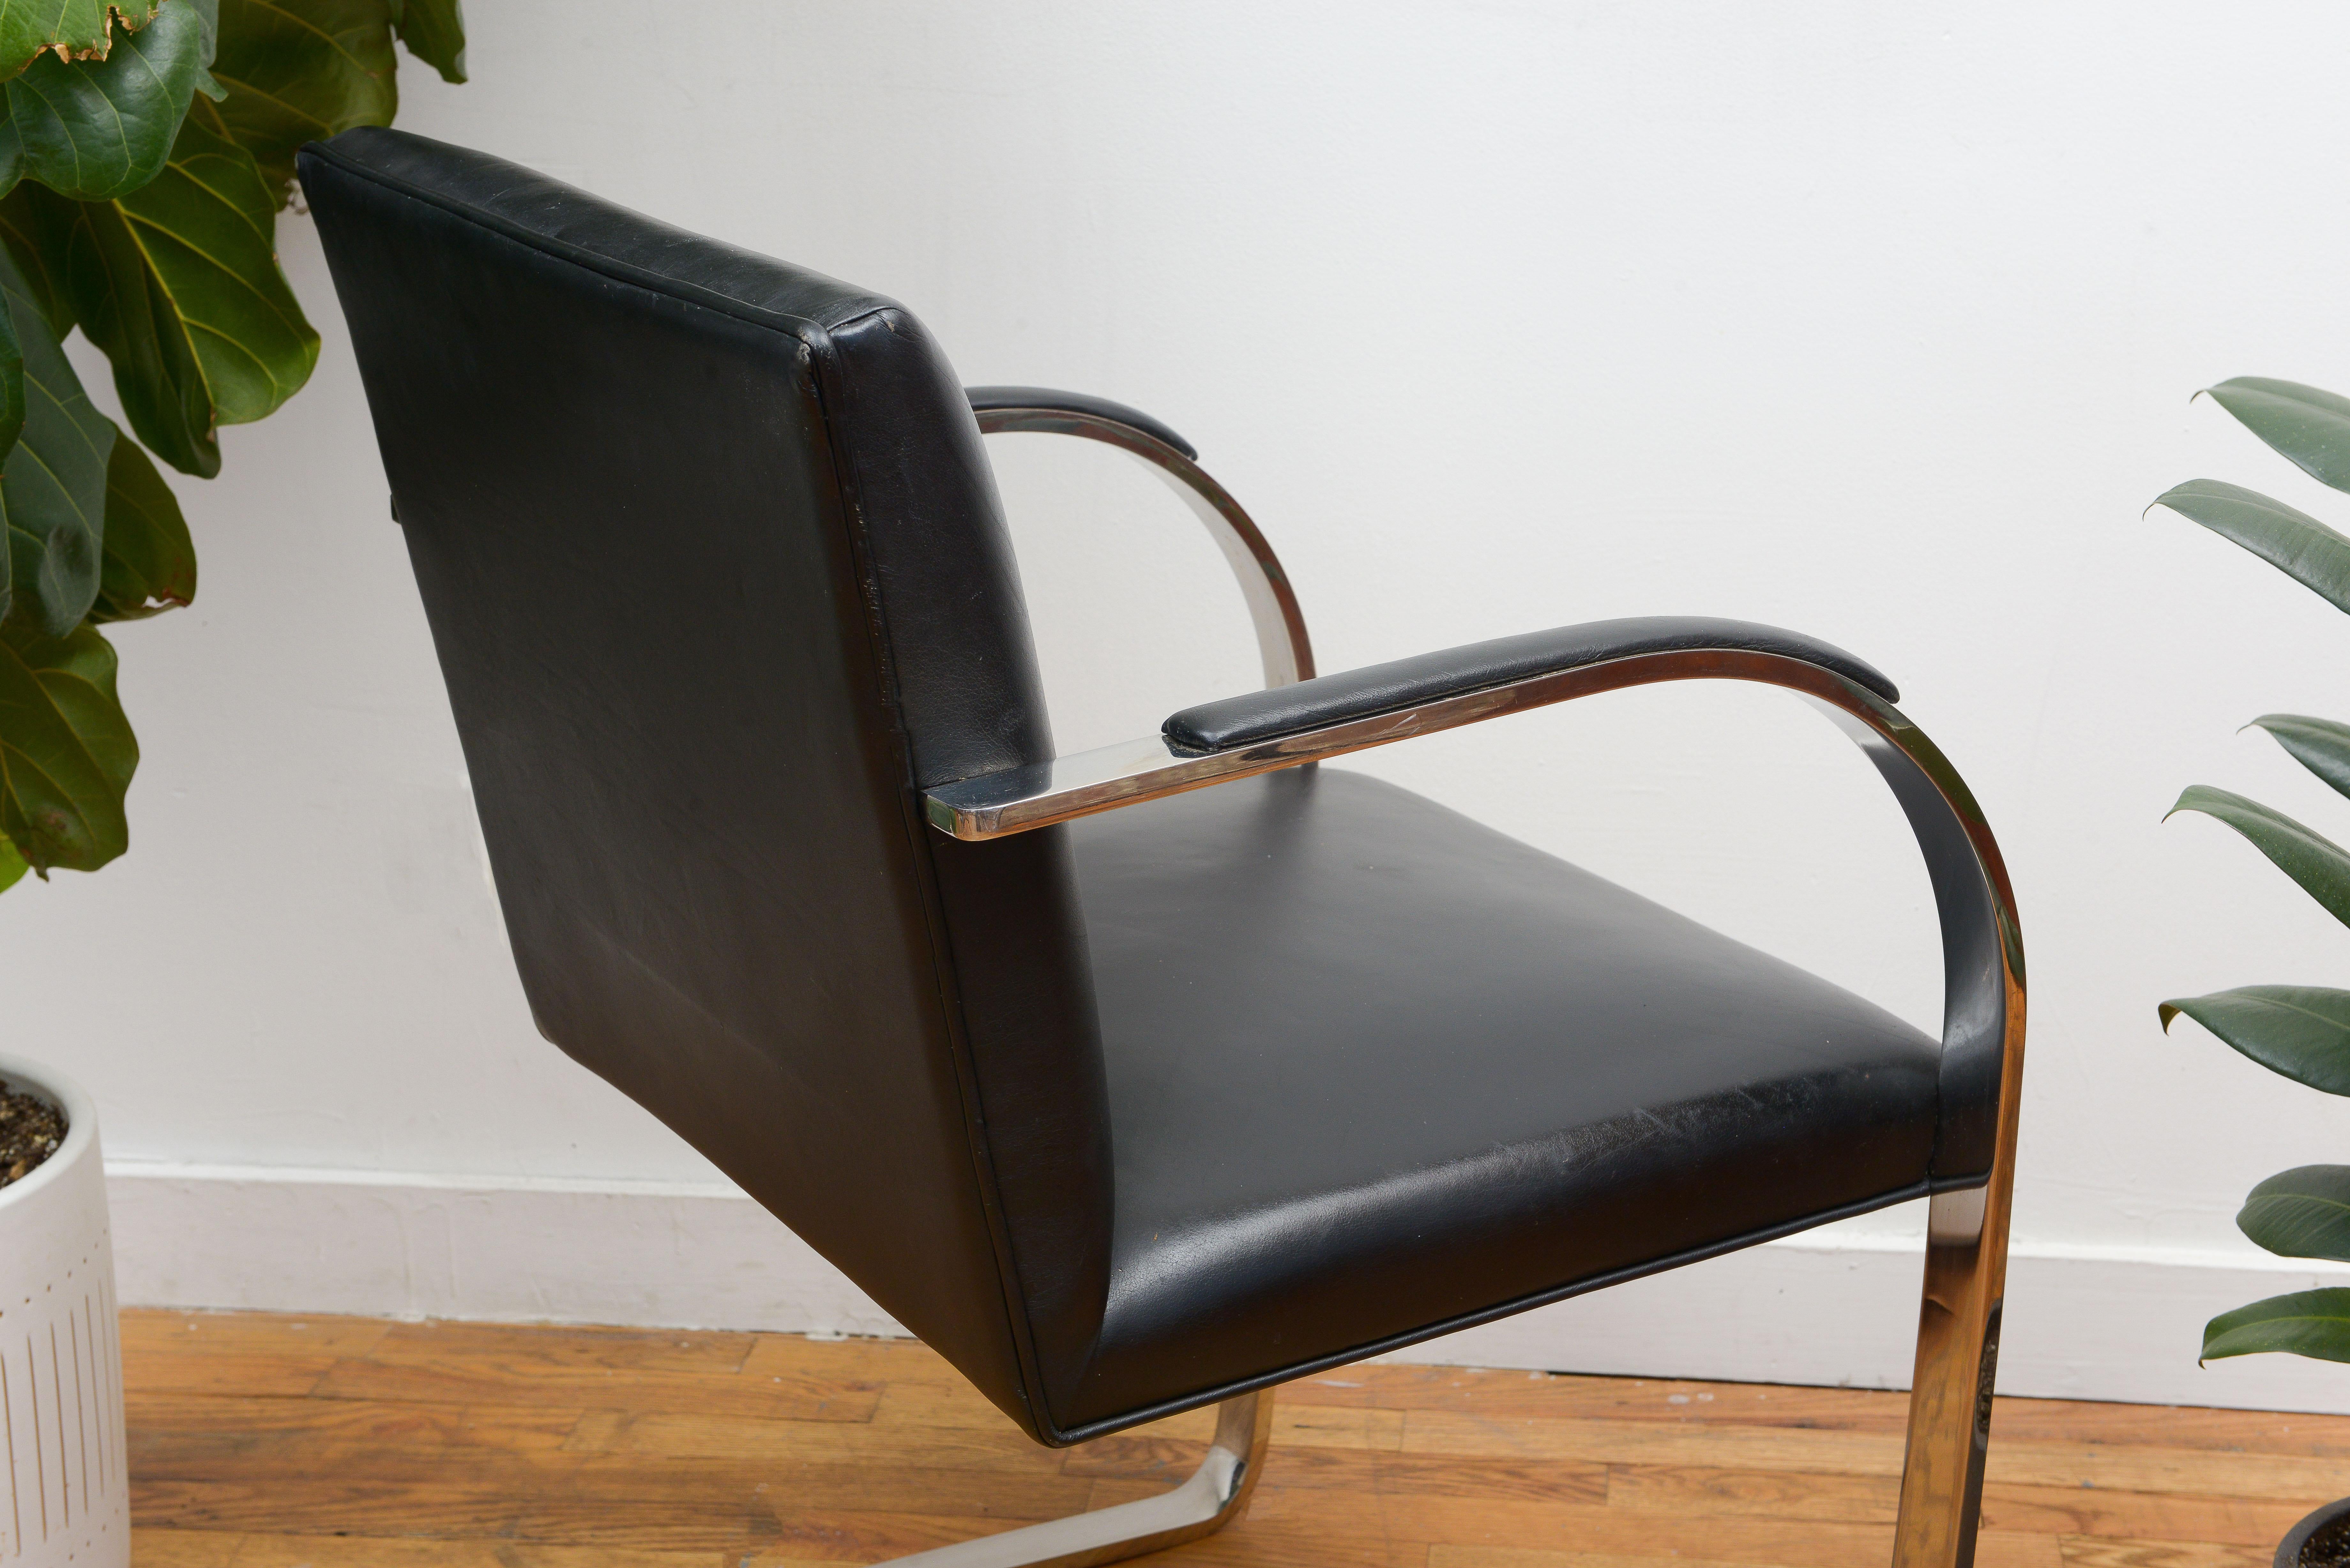 Stainless Steel Iconic Mies van der Rohe BRNO Flat Bar Chair in Black Leather, 1990s For Sale